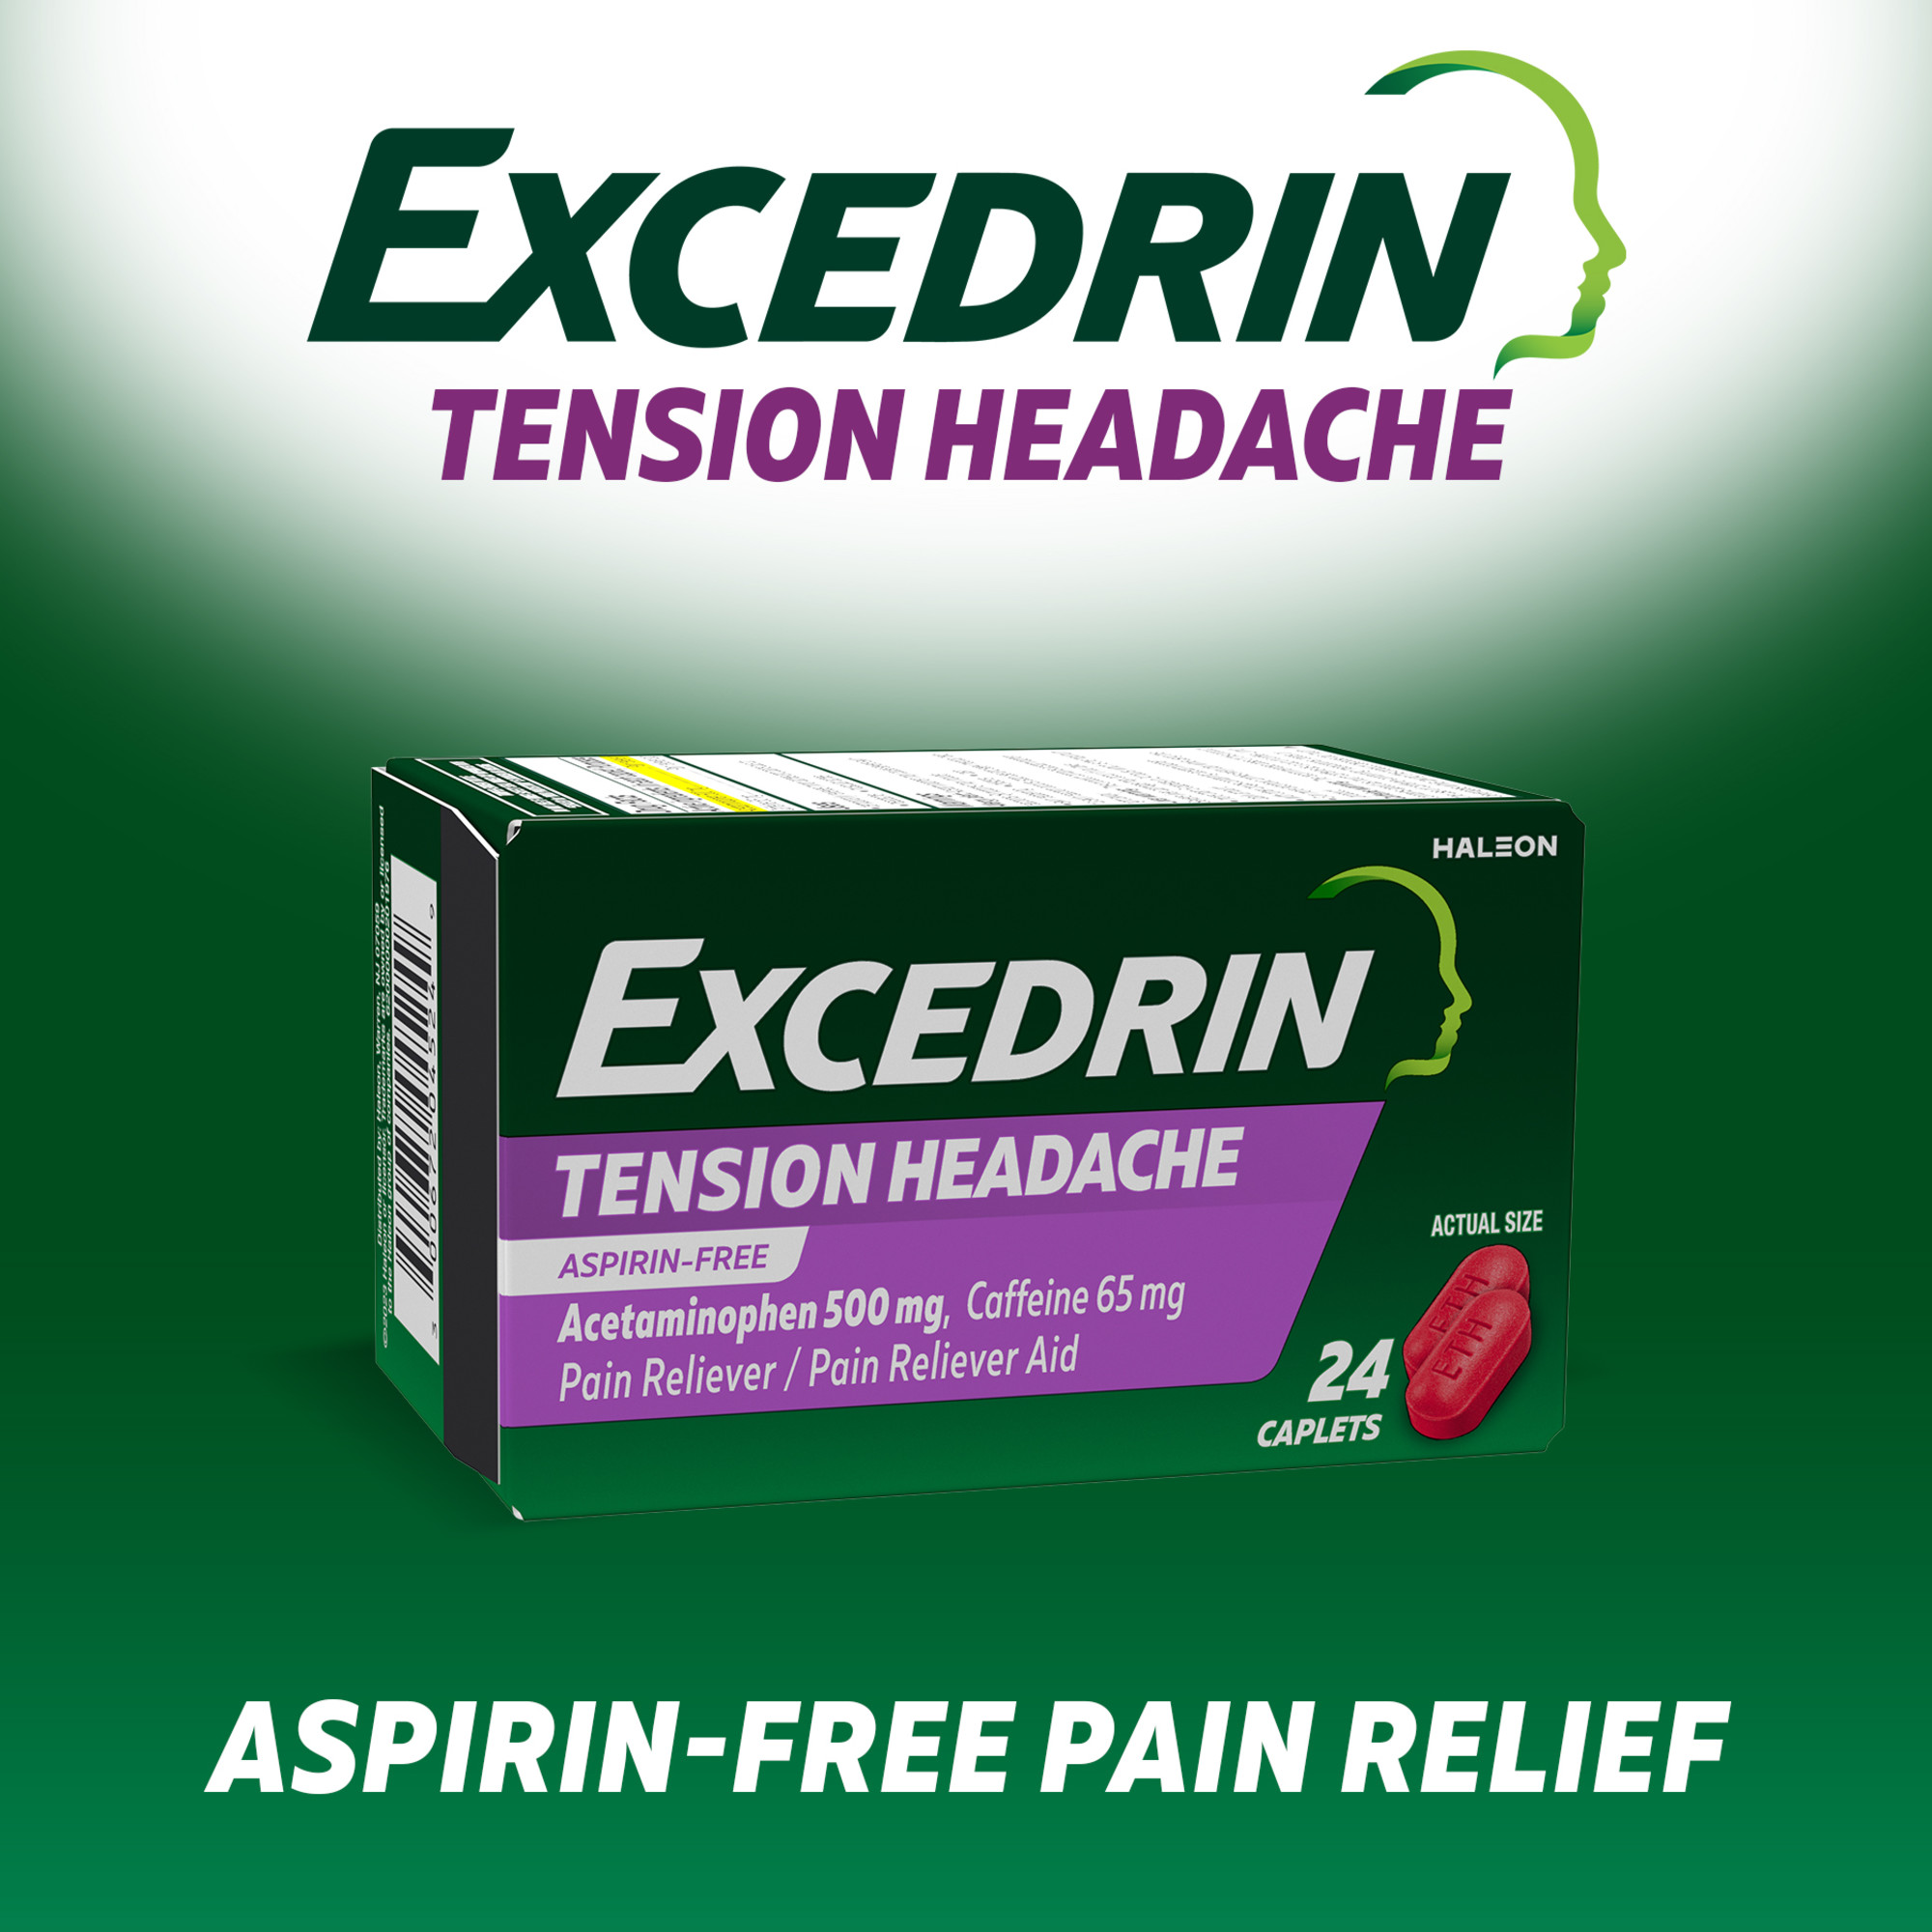 Excedrin Tension Headache Relief Acetaminophen and Caffeine Caplets, 24 Count - image 4 of 11